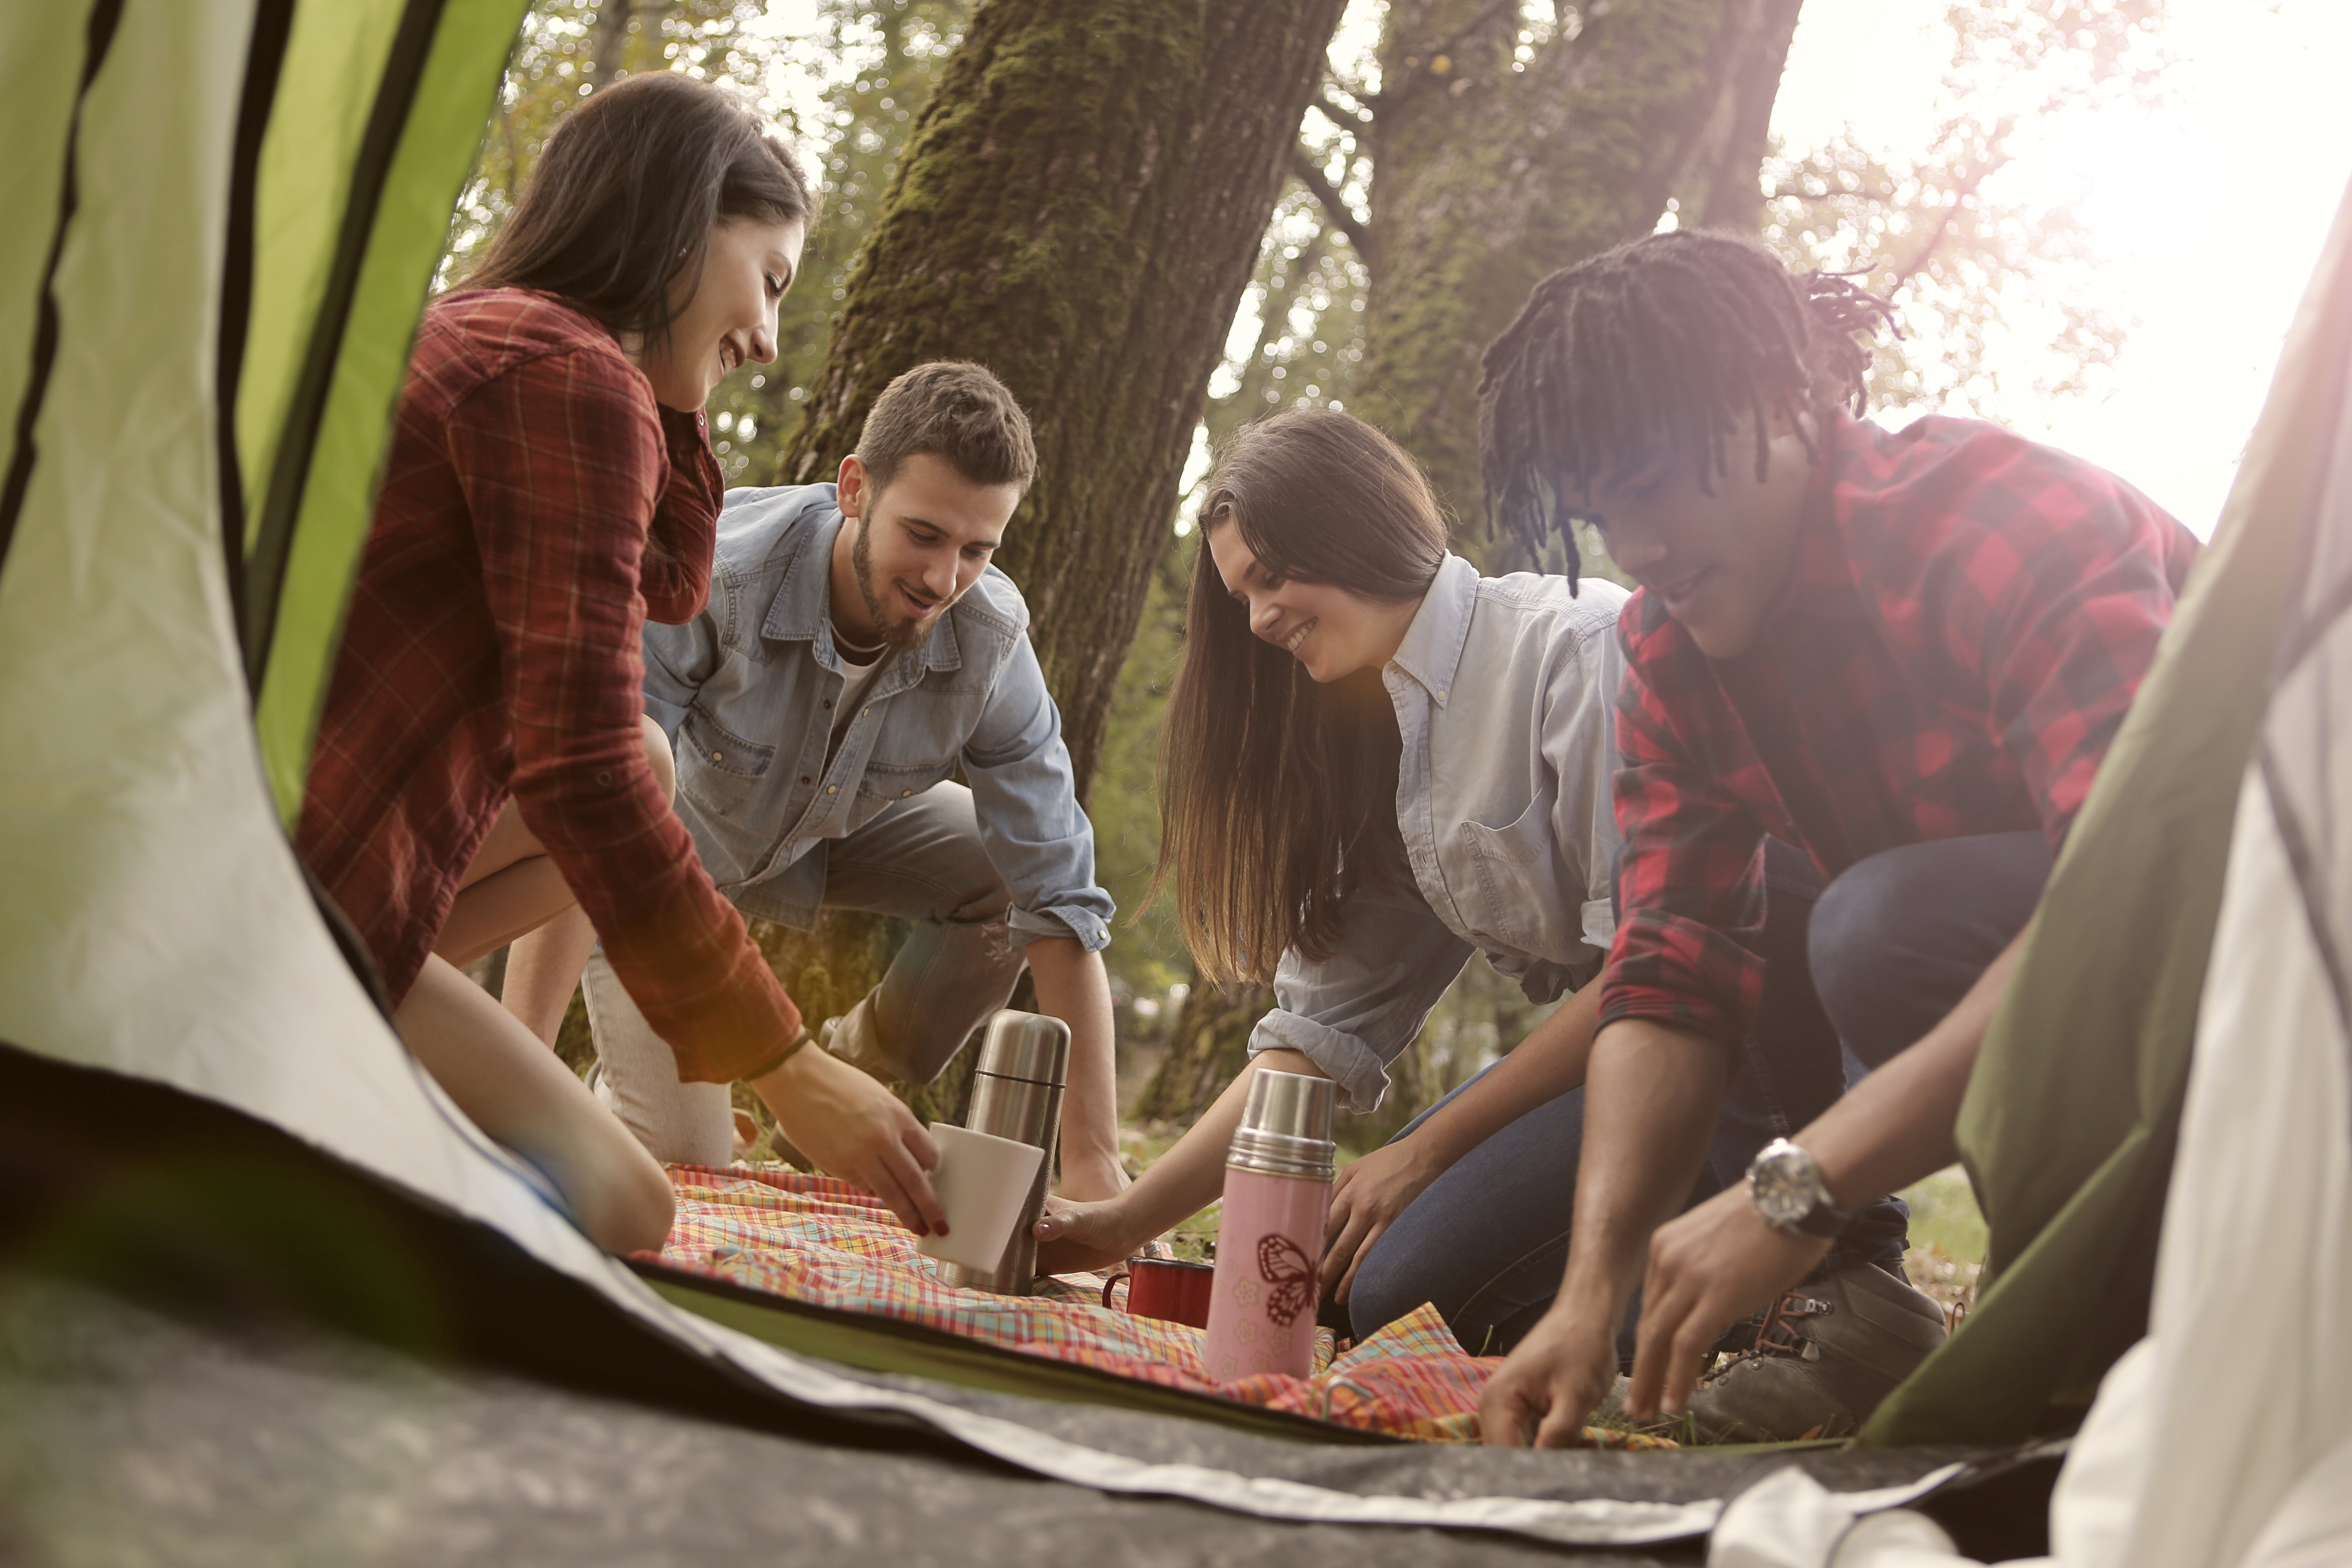 A photo of four young adults enjoying a picnic near a tent in a wooded area. Two women and two men are seen engaging with each other over a colorful picnic blanket spread on the ground. One of the women is reaching for a thermos, while the others appear to be in the midst of conversation and preparing food. The background is softly lit with sunlight filtering through the trees.